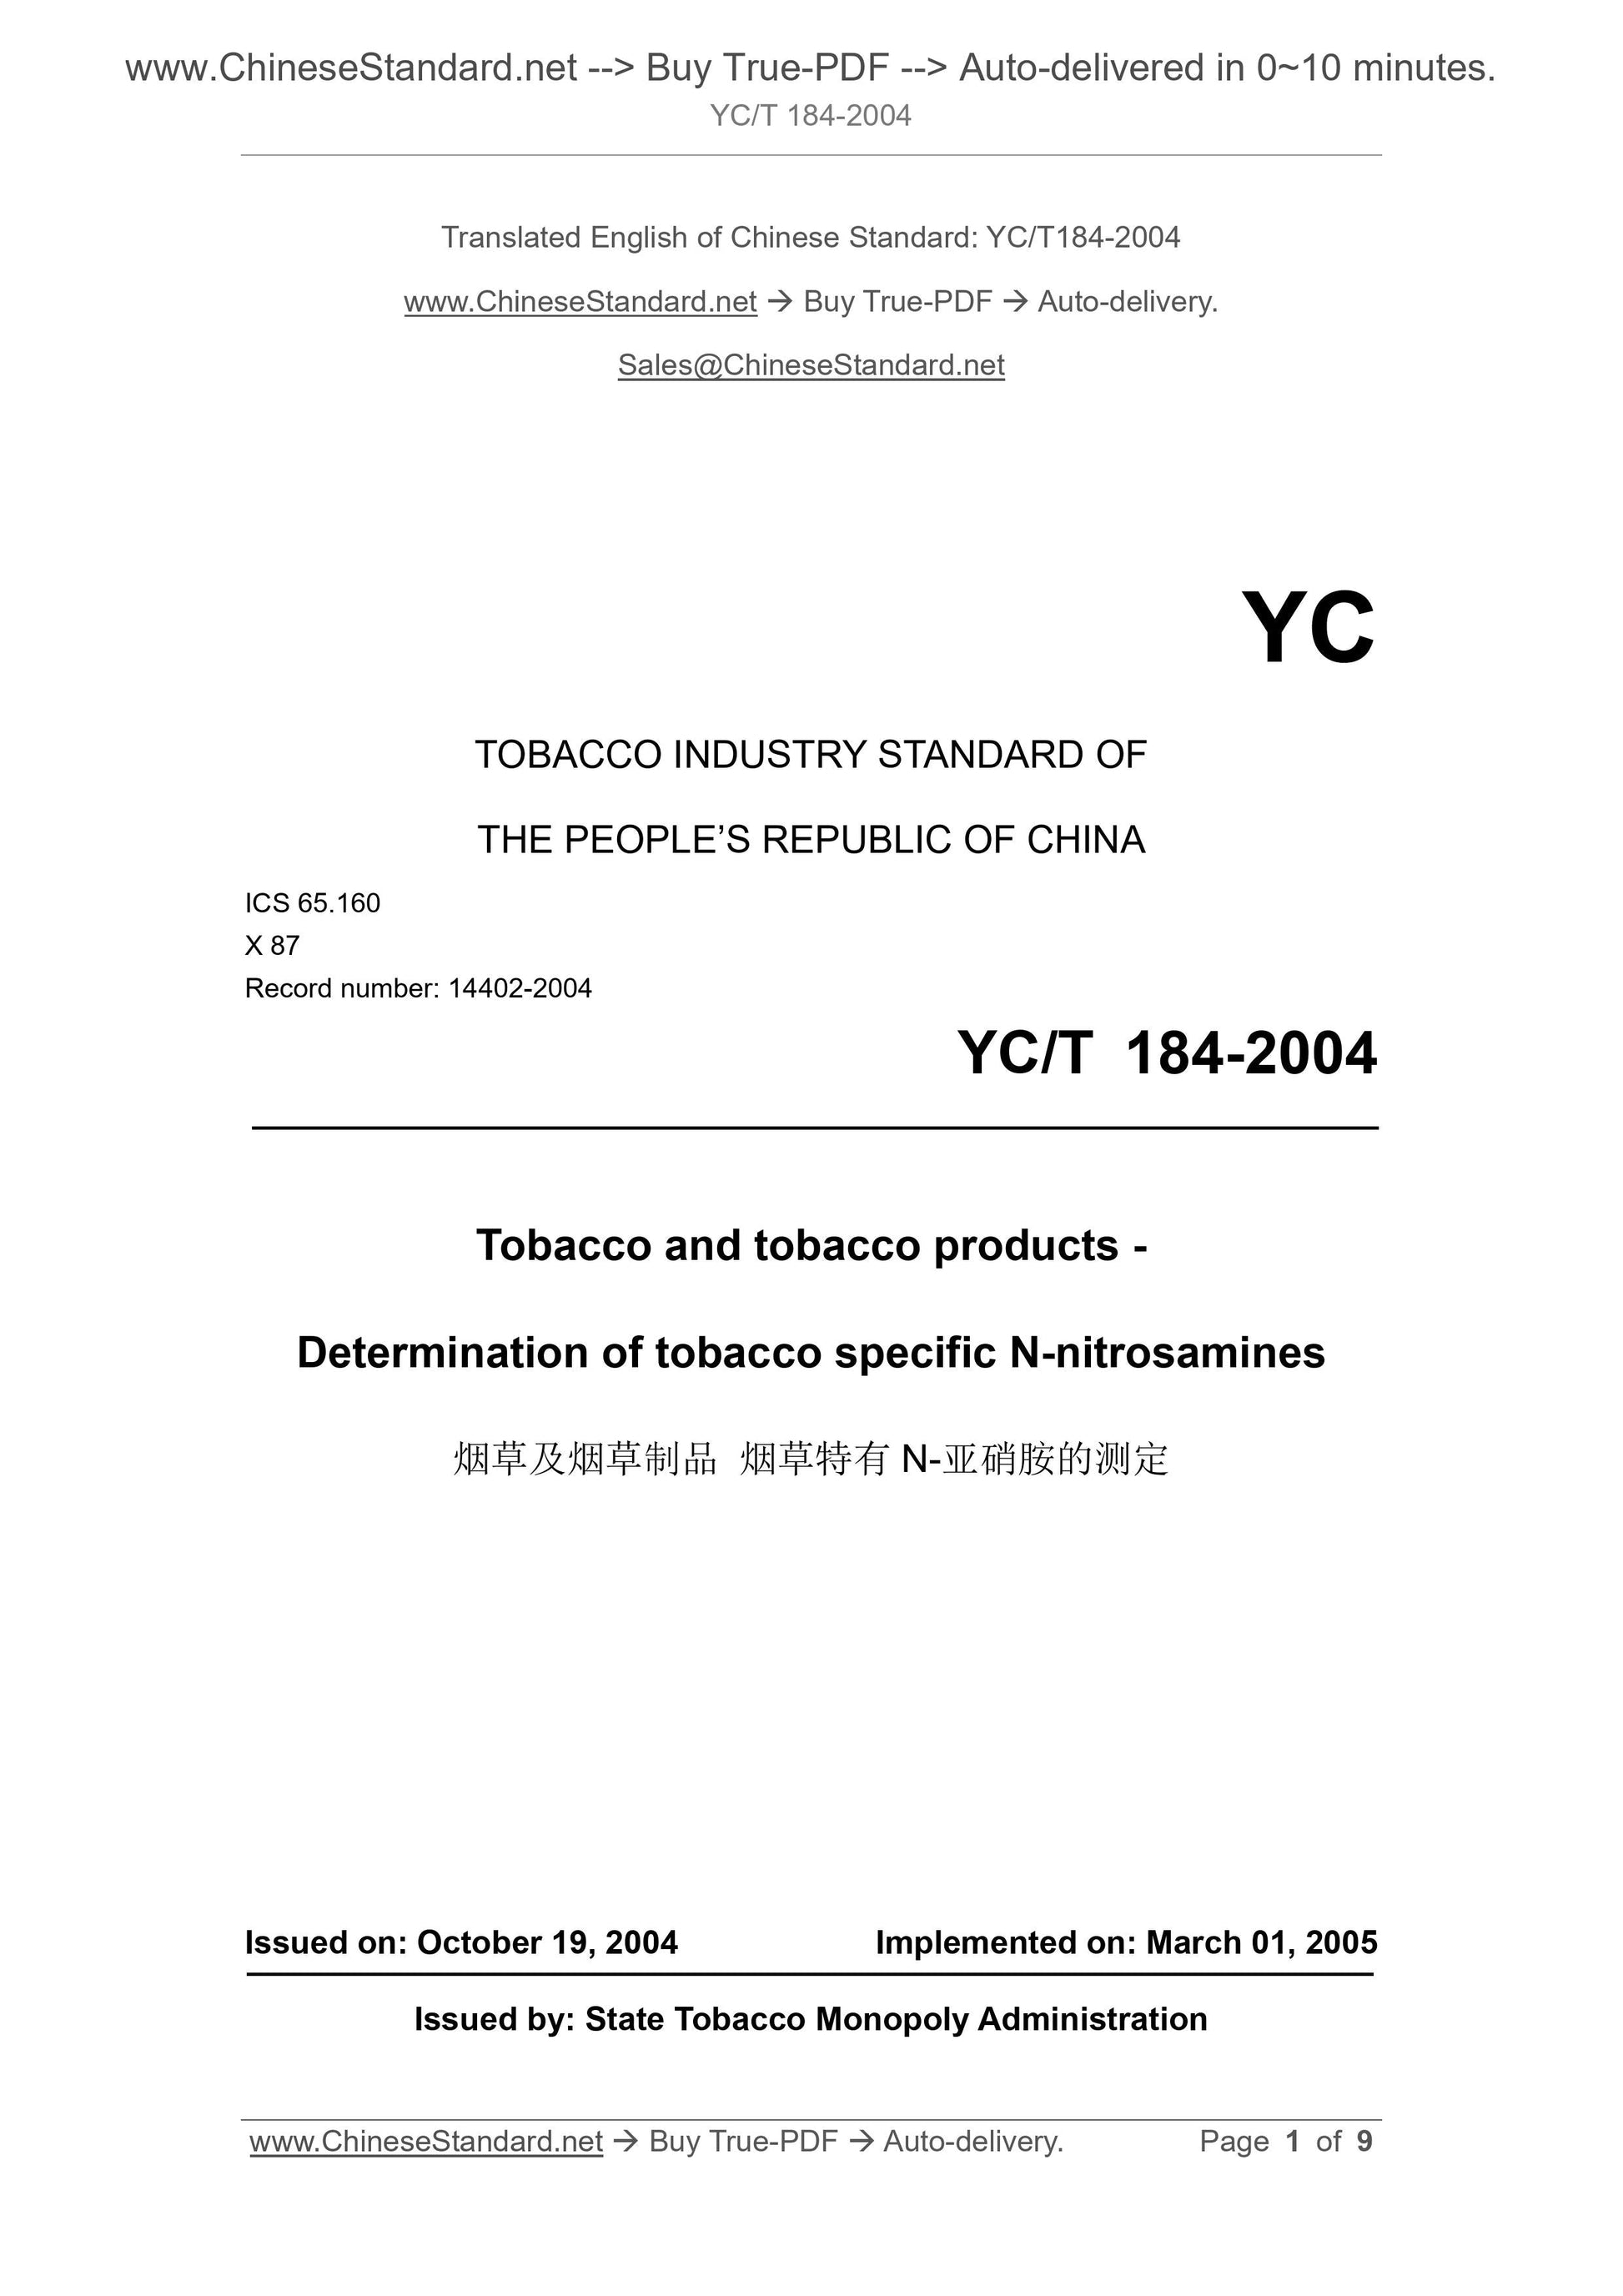 YC/T 184-2004 Page 1